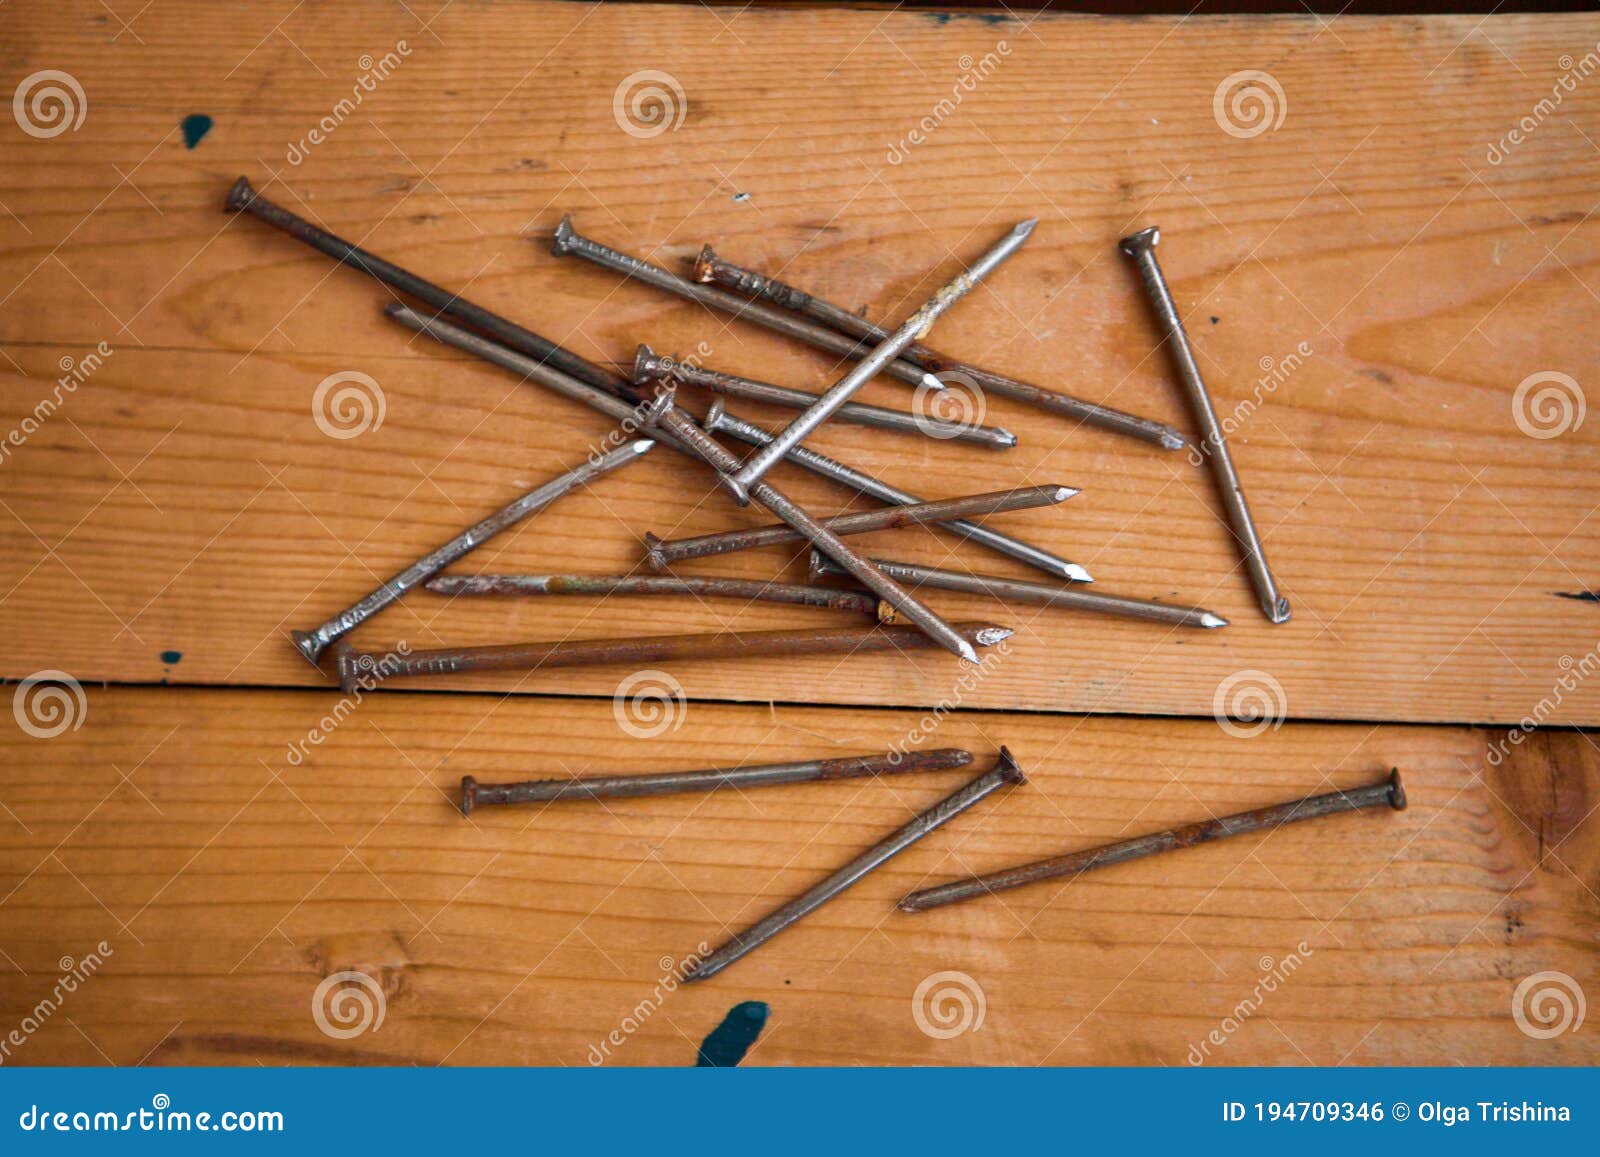 set of metalware, rusty nails on the wooden background